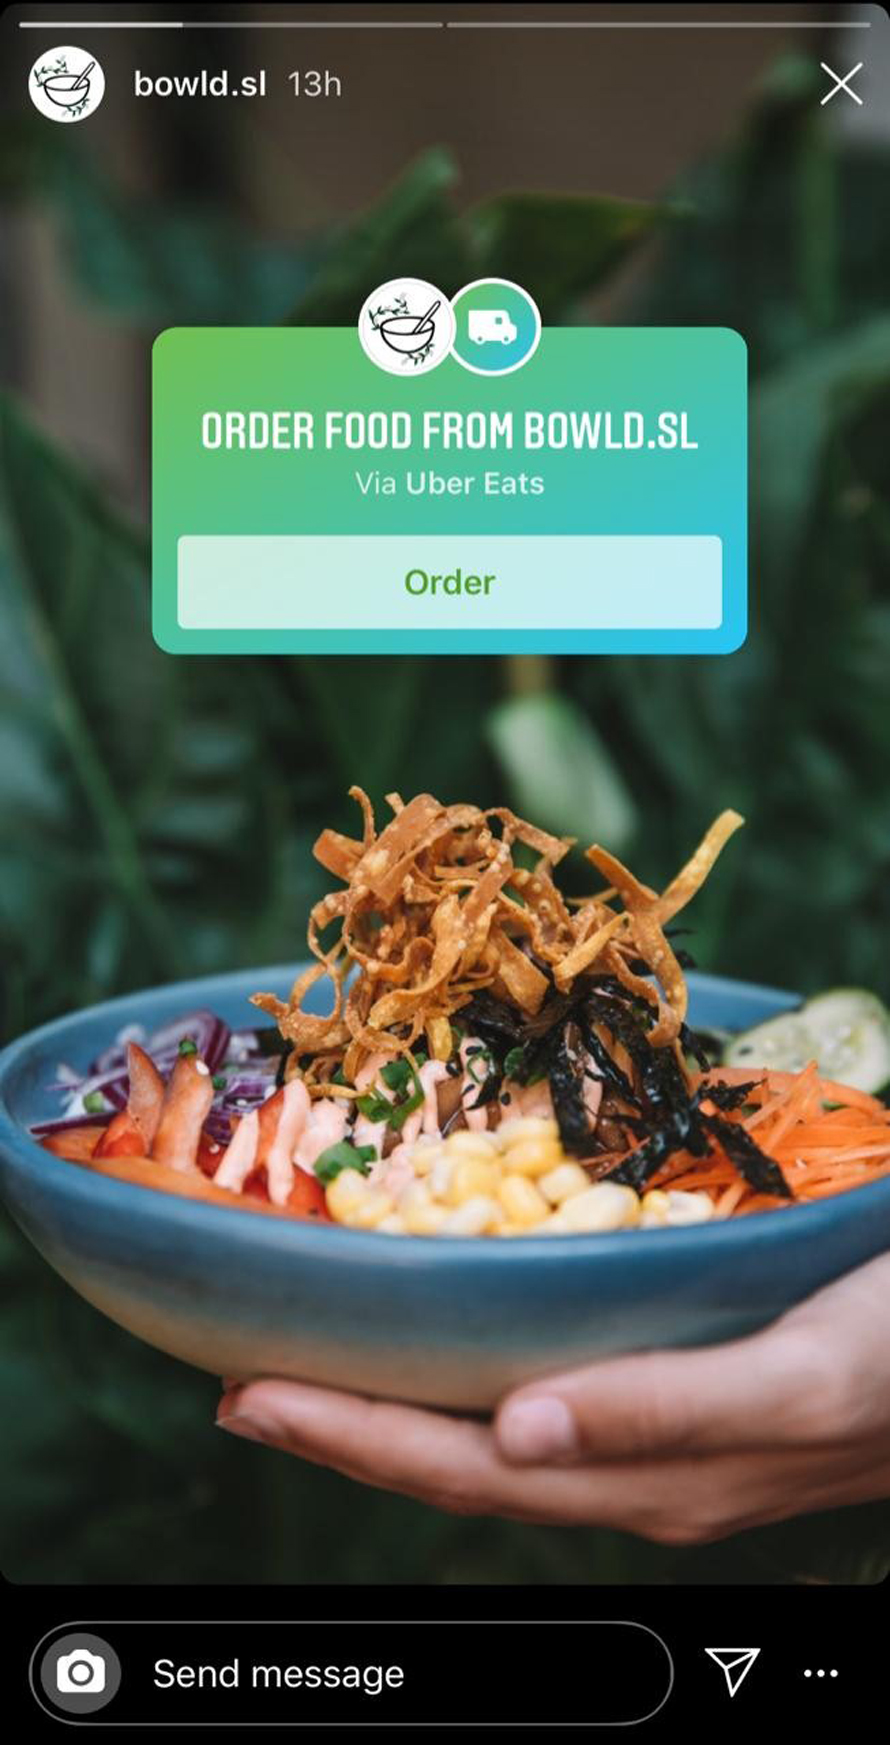 Restaurants Can Now Add New Food Order Features on Instagram image 2